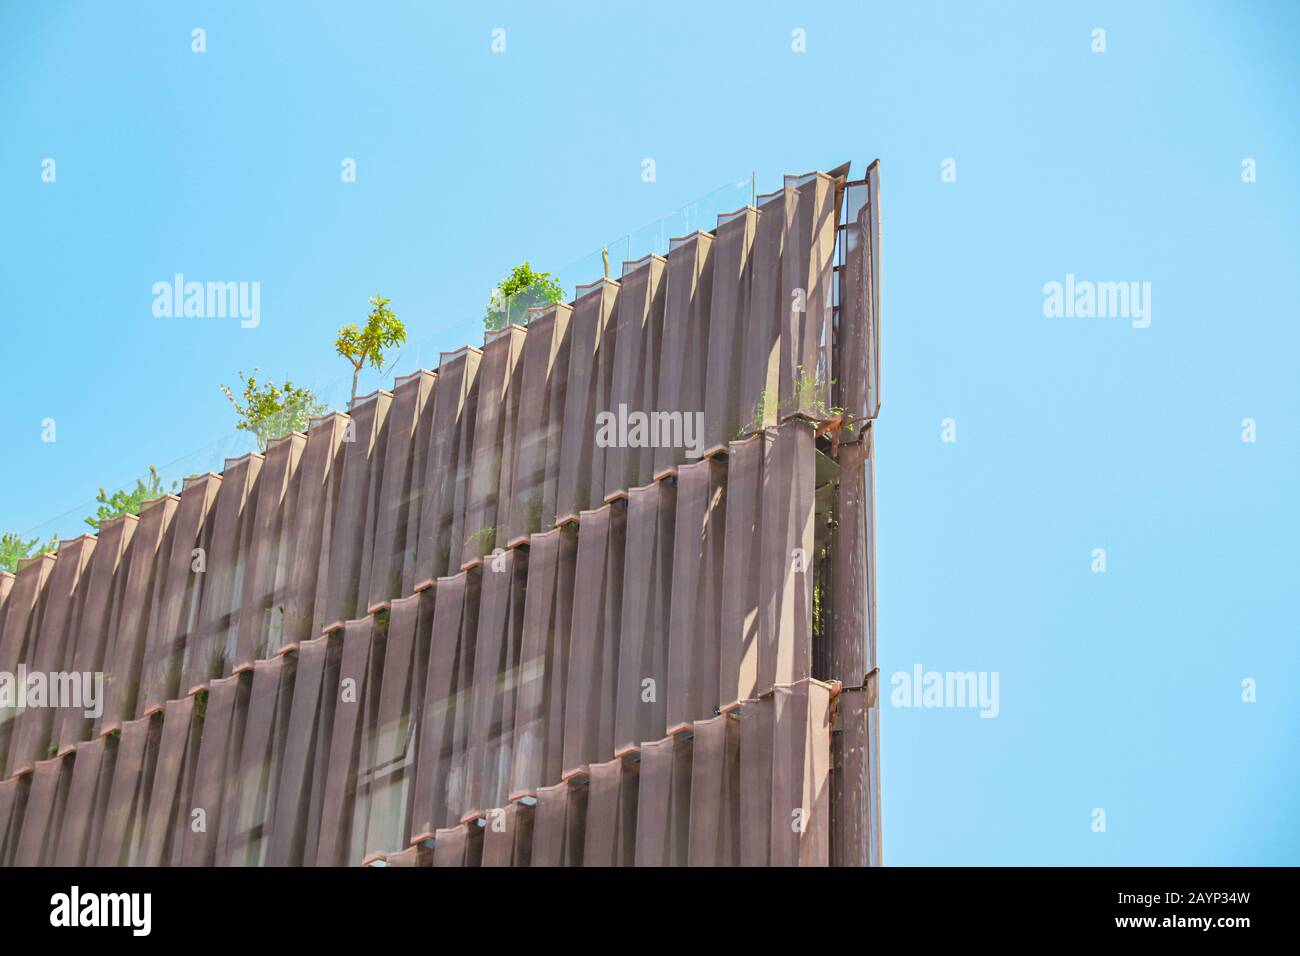 A generic building filled with trees in an effort to promote sustainable lifestyle (Smart city concept) in the city of Bangkok, Thailand Stock Photo